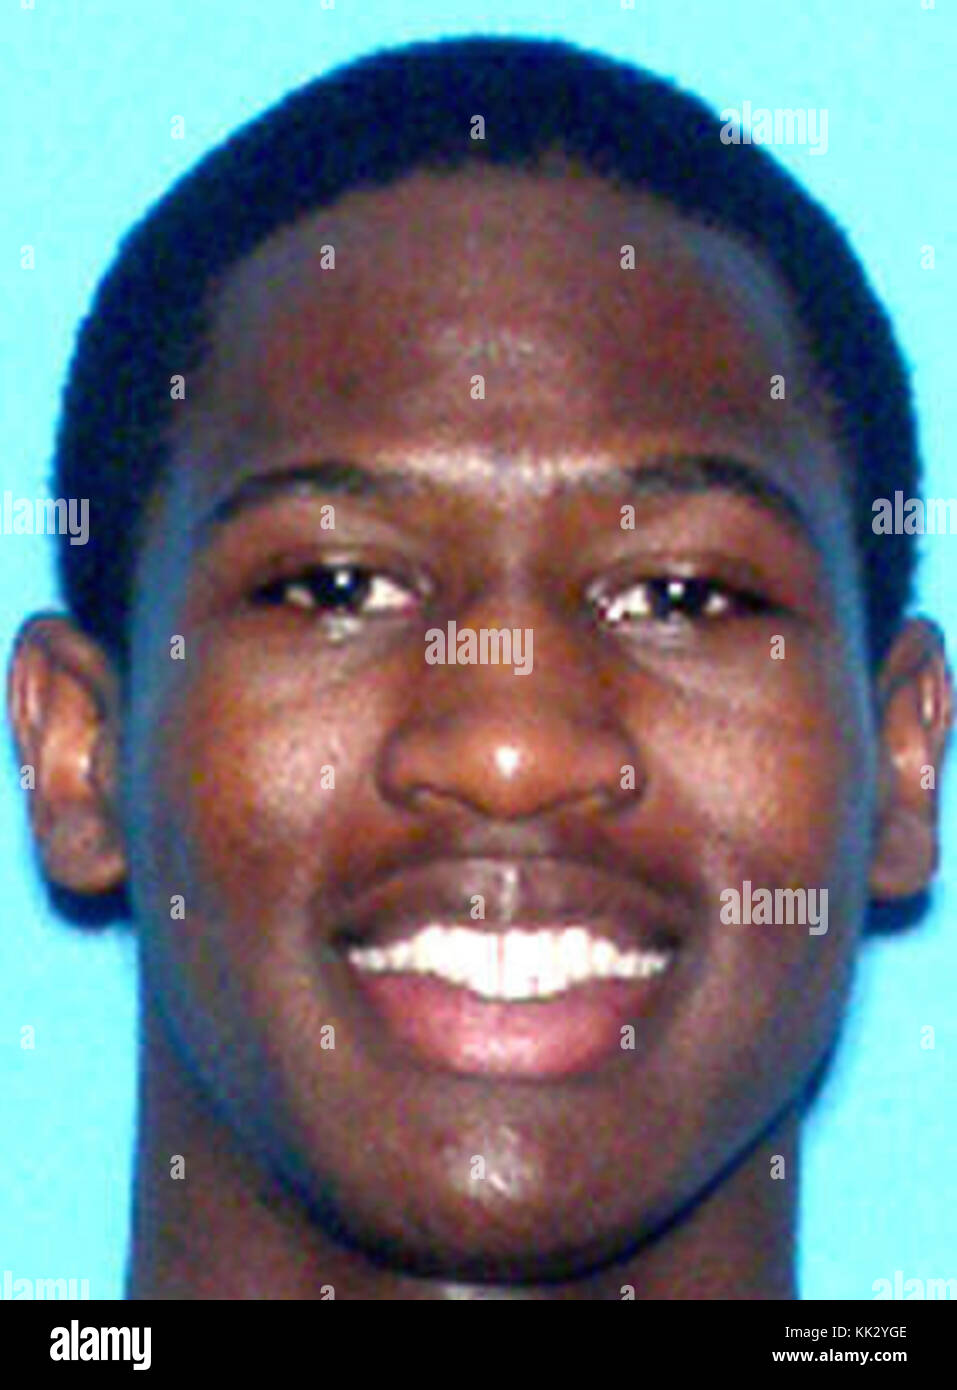 Tampa, Florida, USA. 28th Nov, 2017. Howell Emanuel Donaldson III, is seen in this undated driver's license photograph provided by the Tampa, Florida Police Department. The 24 year-old was arrested by Tampa Police on November 28, 2017 and charged with four counts of murder in connection with a series of four homicides that occurred in the Seminole Heights neighborhood of Tampa between October 9, 2017 and November 14, 2017. Donaldson was arrested after leaving a 9mm handgun with the manager of a McDonald's  restaurant near the area of the murders. Credit: Paul Hennessy/Alamy Live News Stock Photo